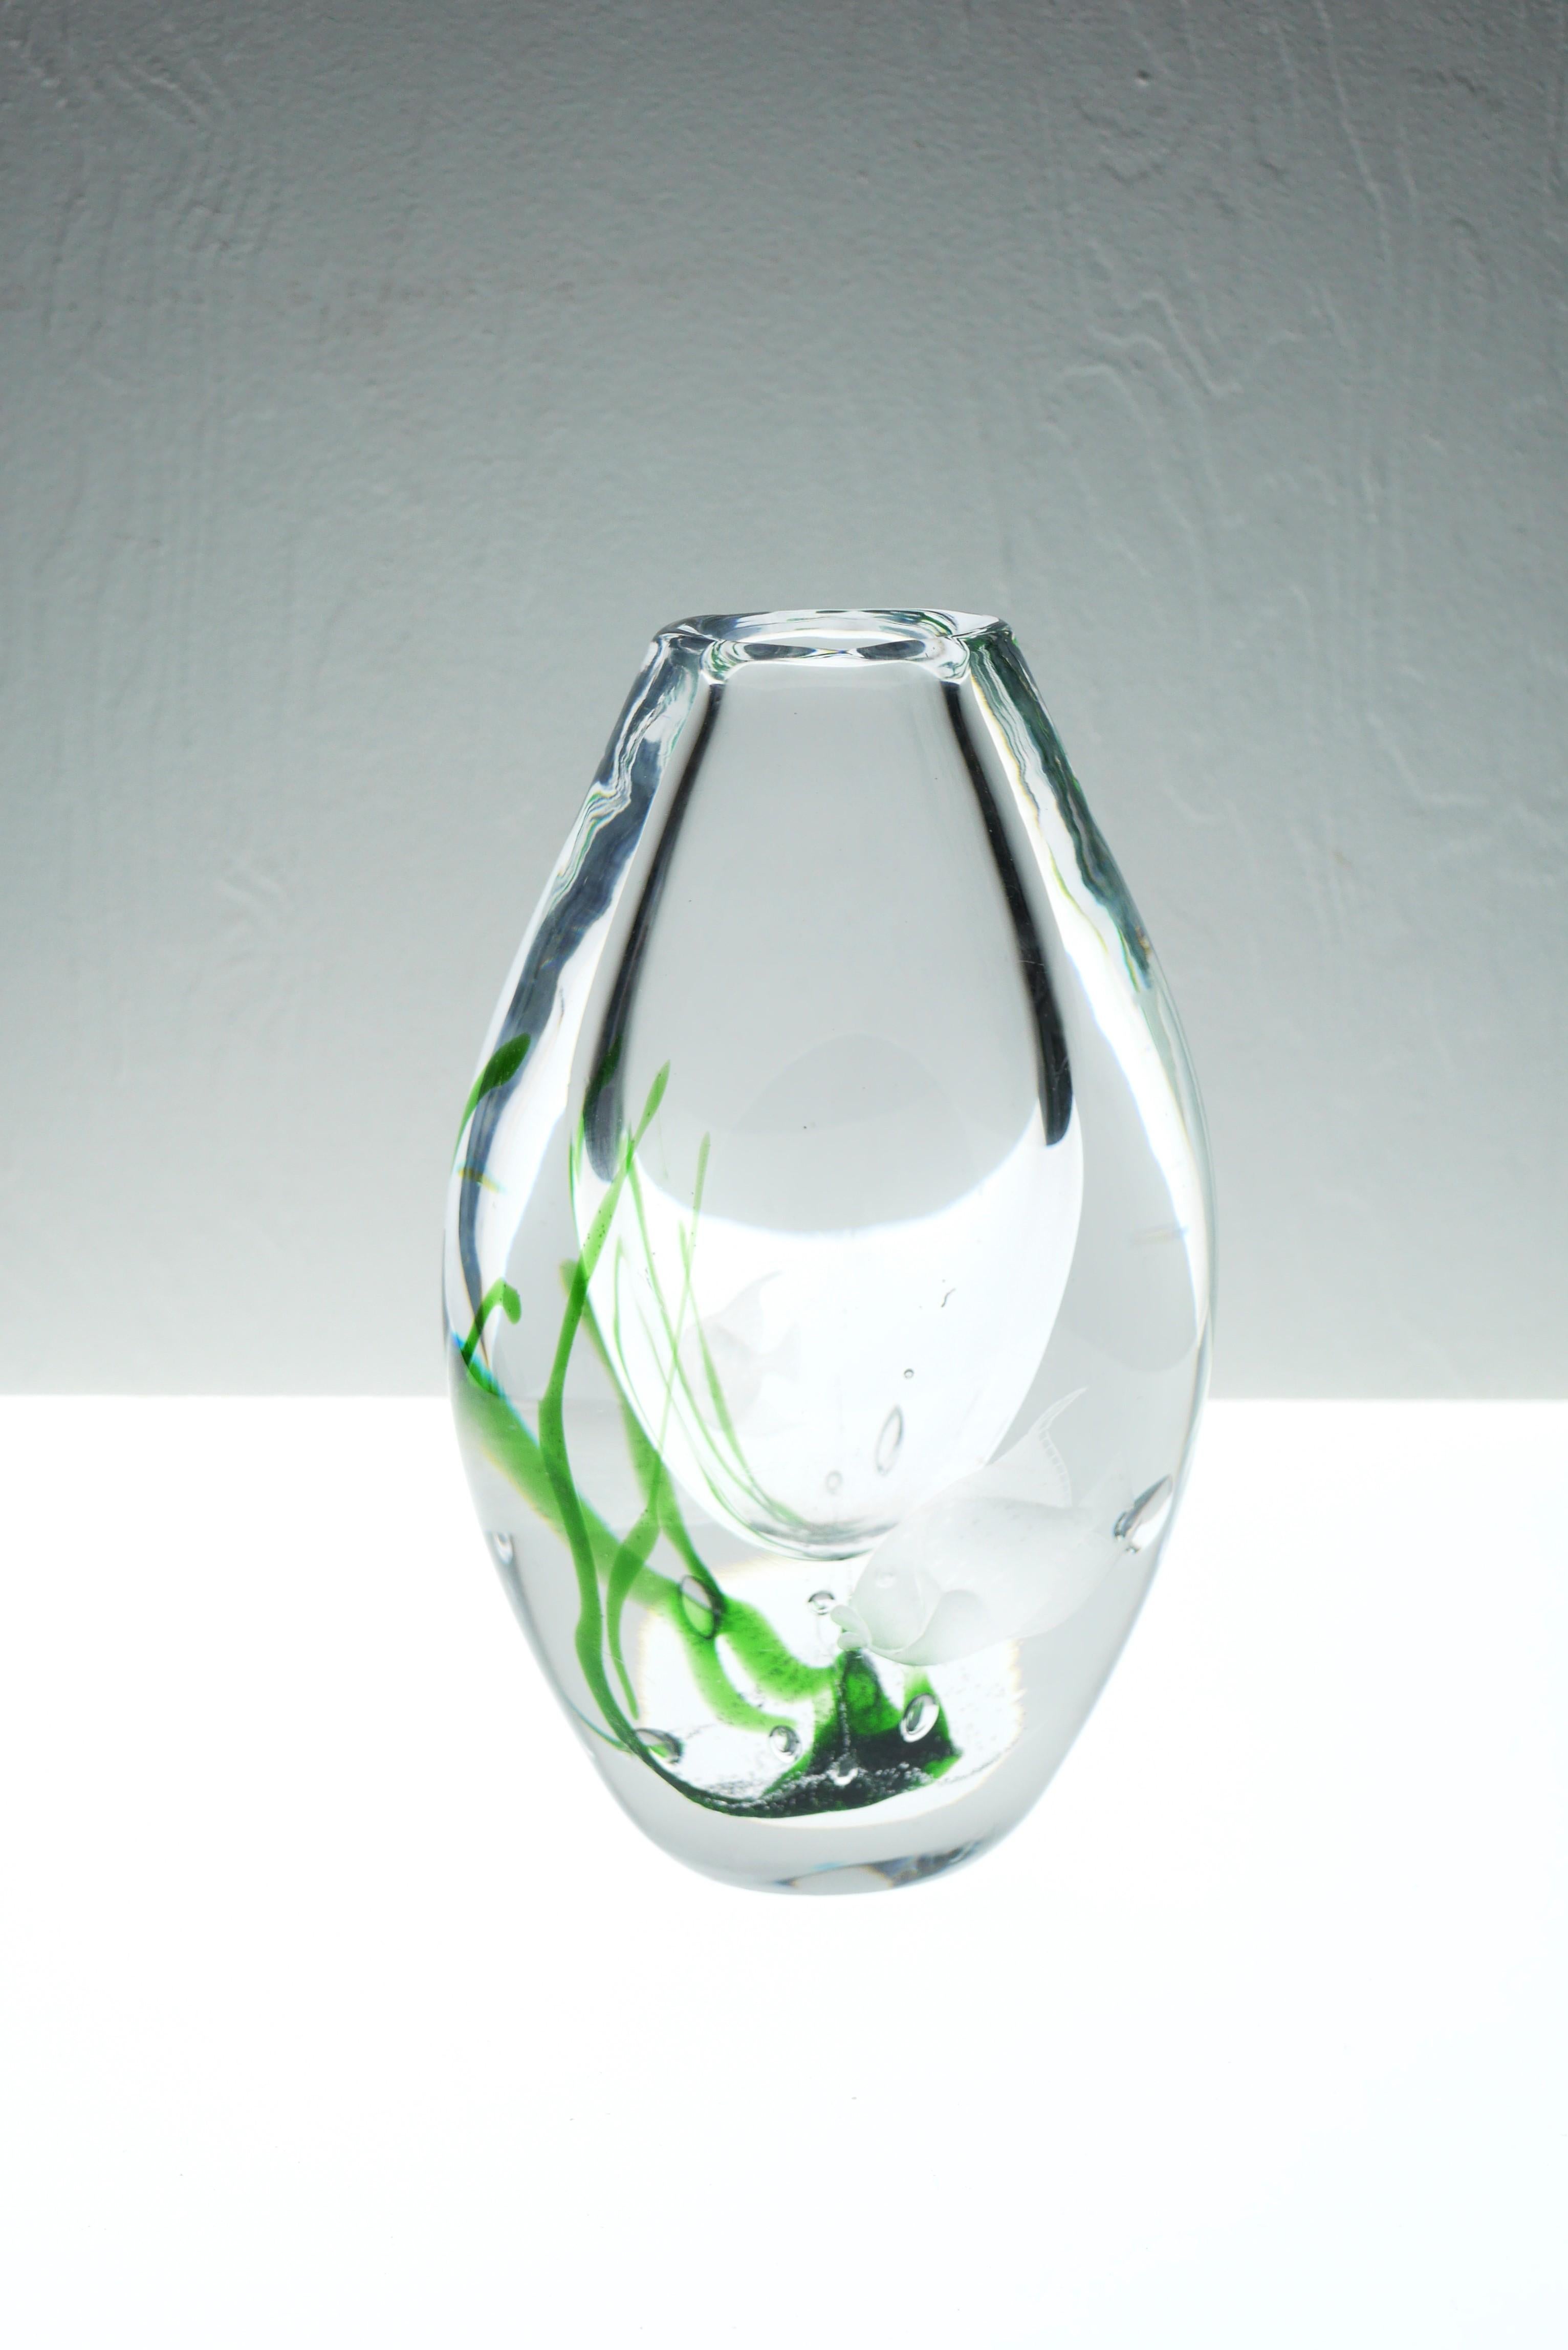 An extraordinary and stunningly and rather large beautiful handblown vintage signed glass vase, known as 